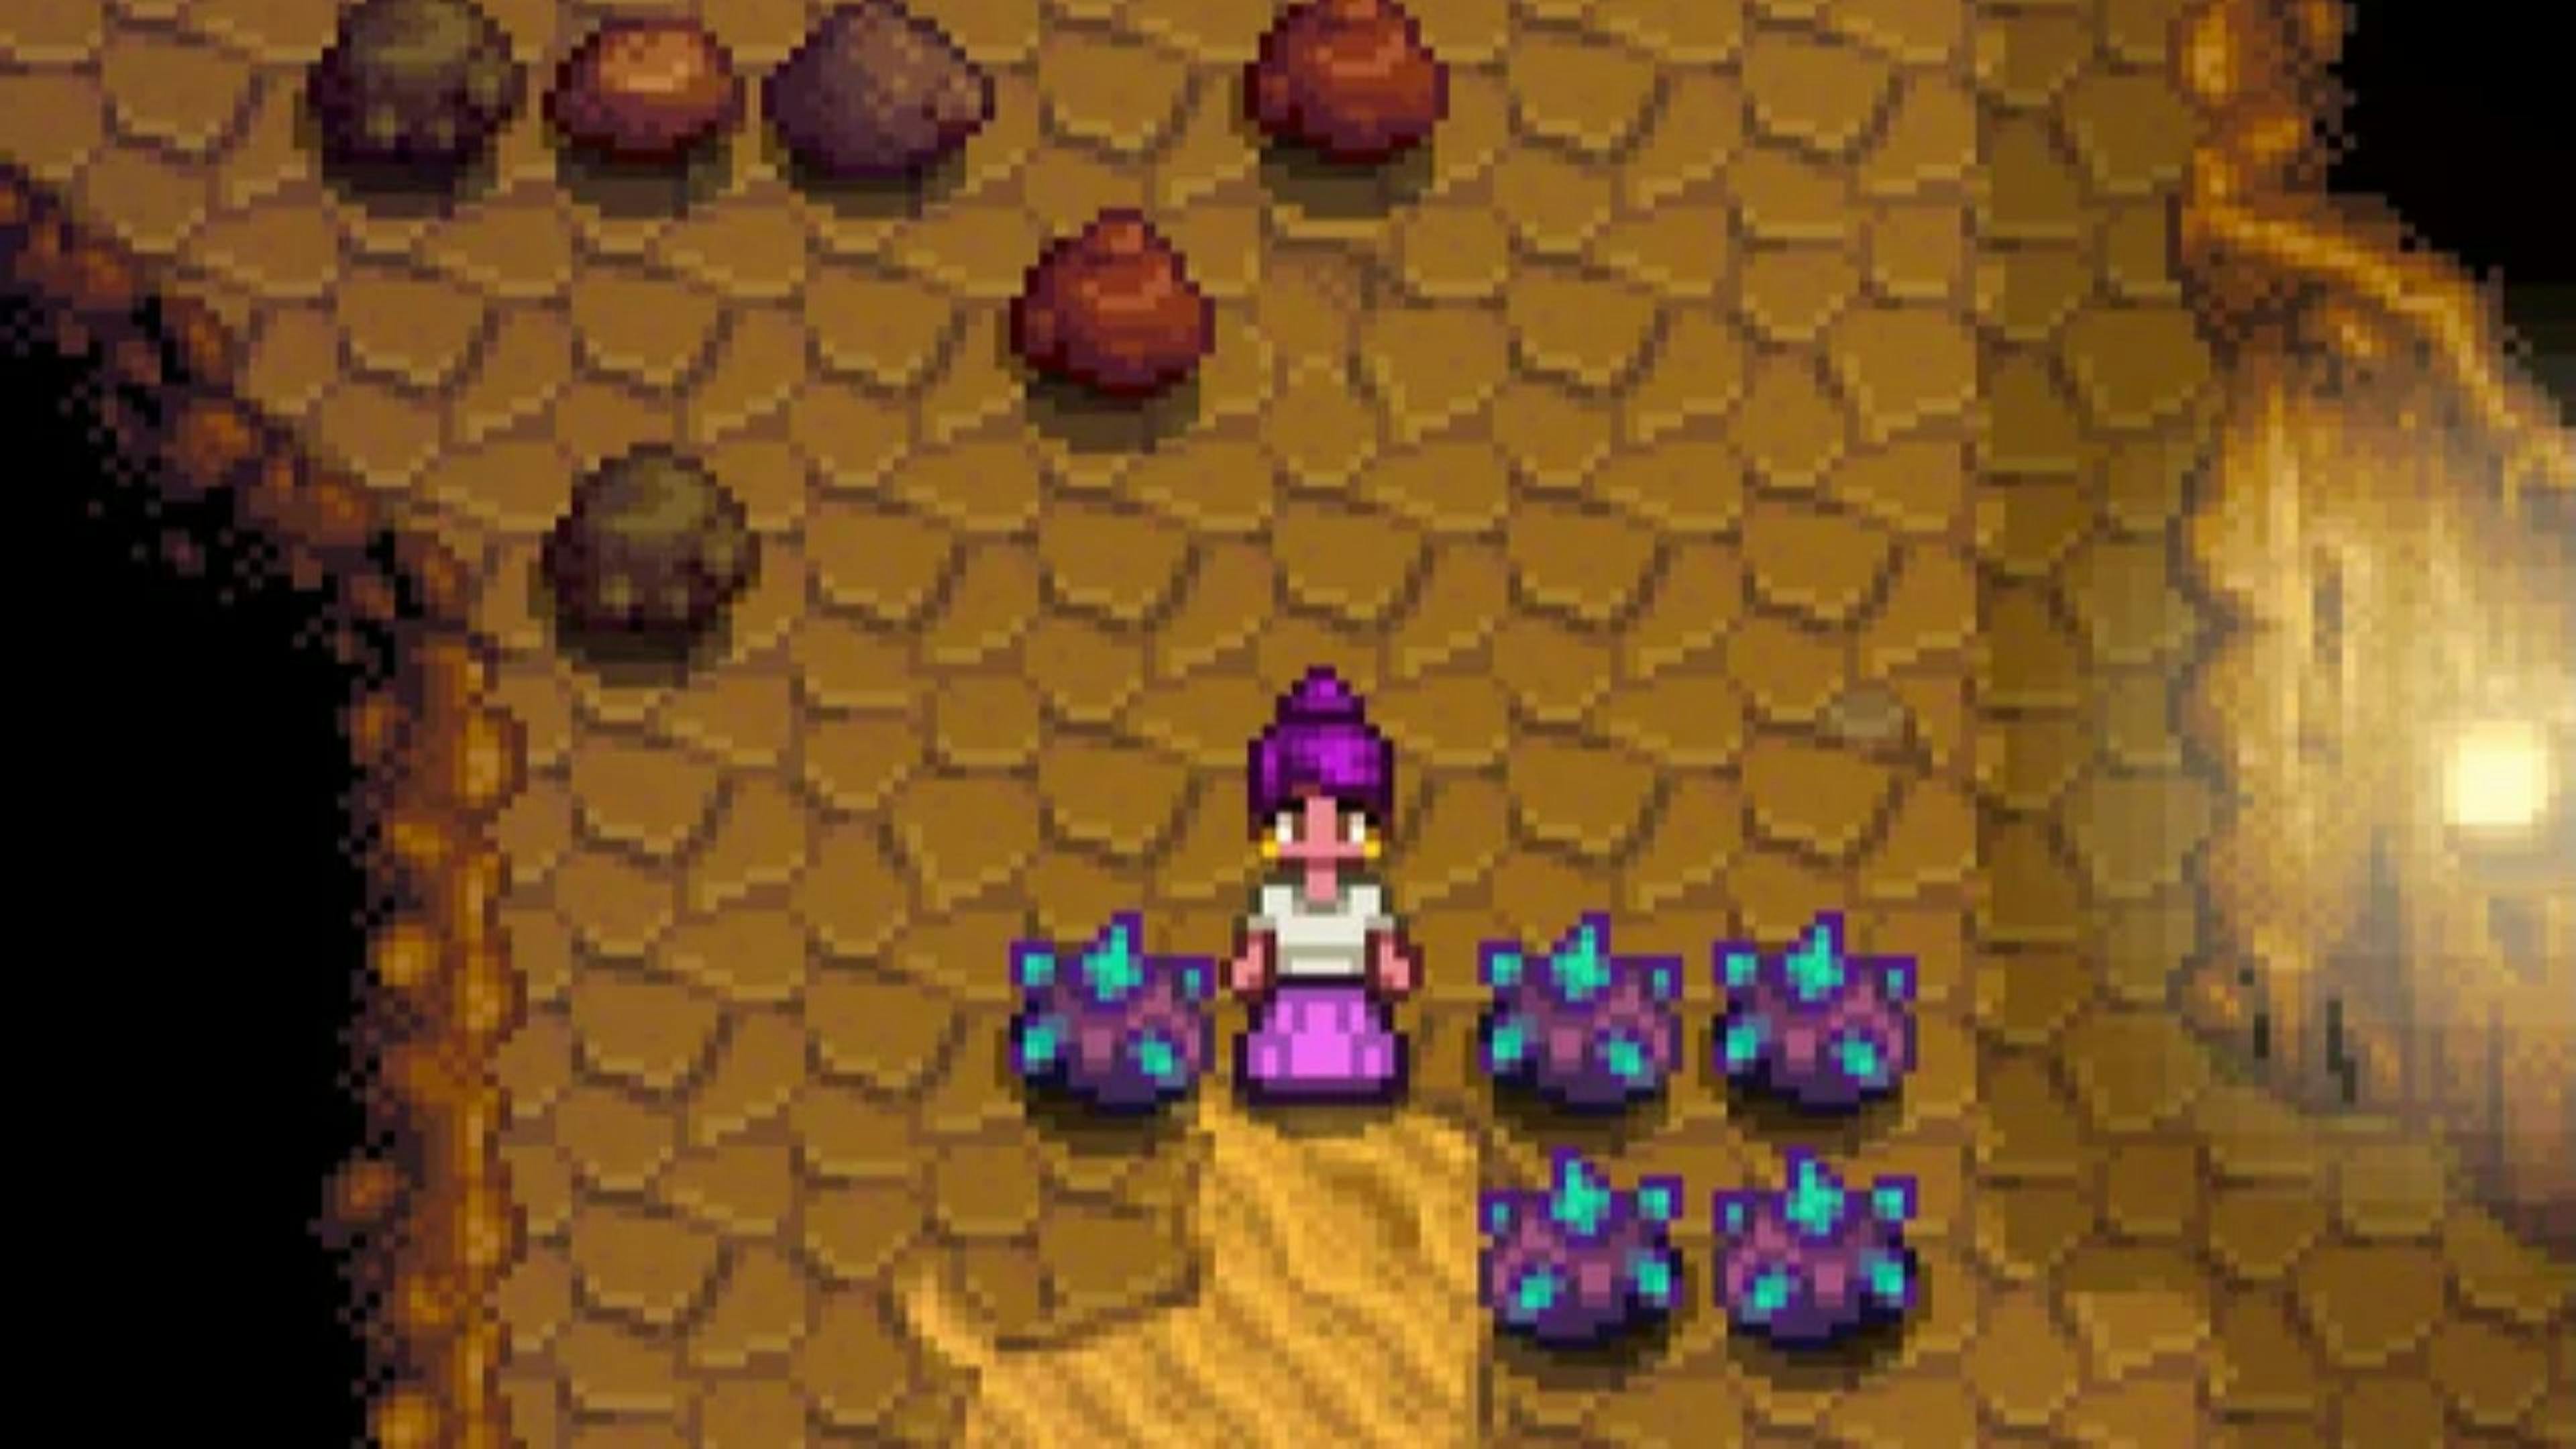 Finding iridium ore while exploring the Skull Cavern in Stardew Valley.